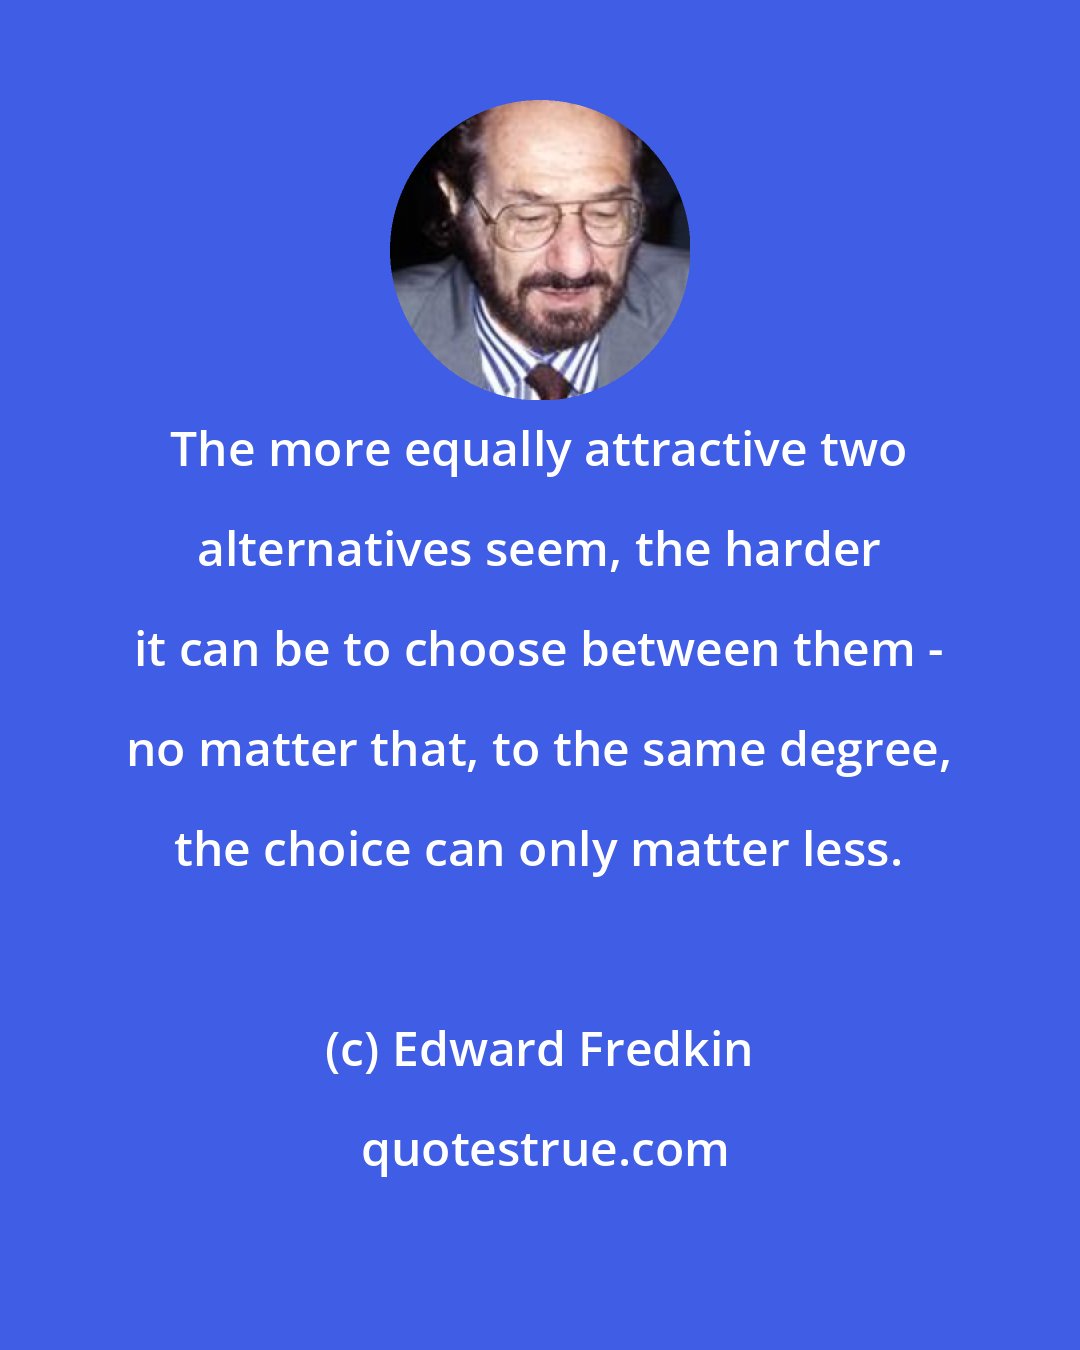 Edward Fredkin: The more equally attractive two alternatives seem, the harder it can be to choose between them - no matter that, to the same degree, the choice can only matter less.